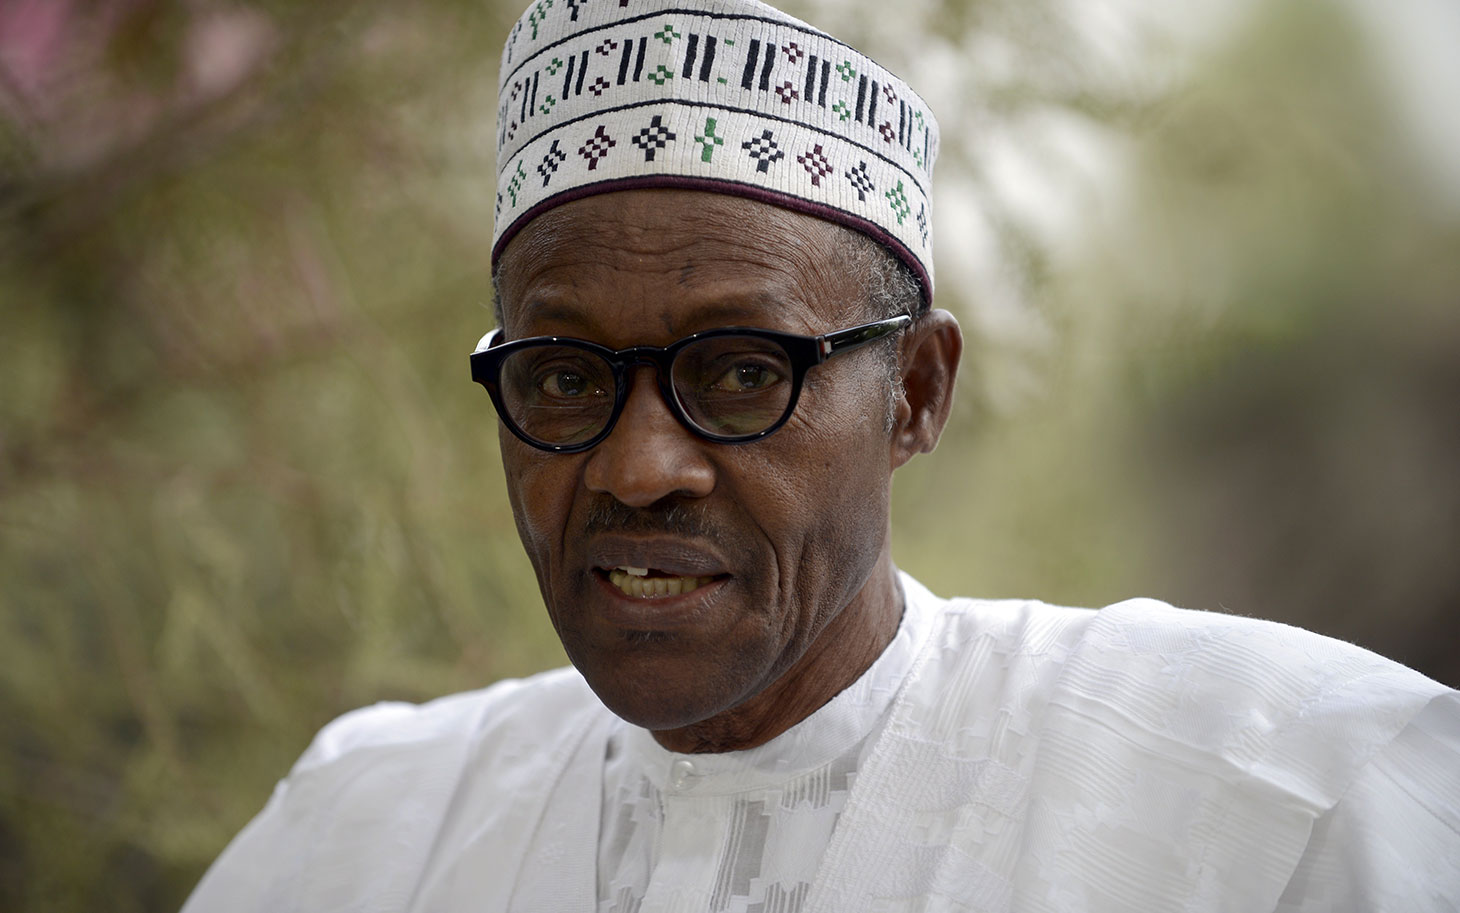 Nigeria’s Buhari Says Monetary Policy Alone Not Enough to Expand Economy